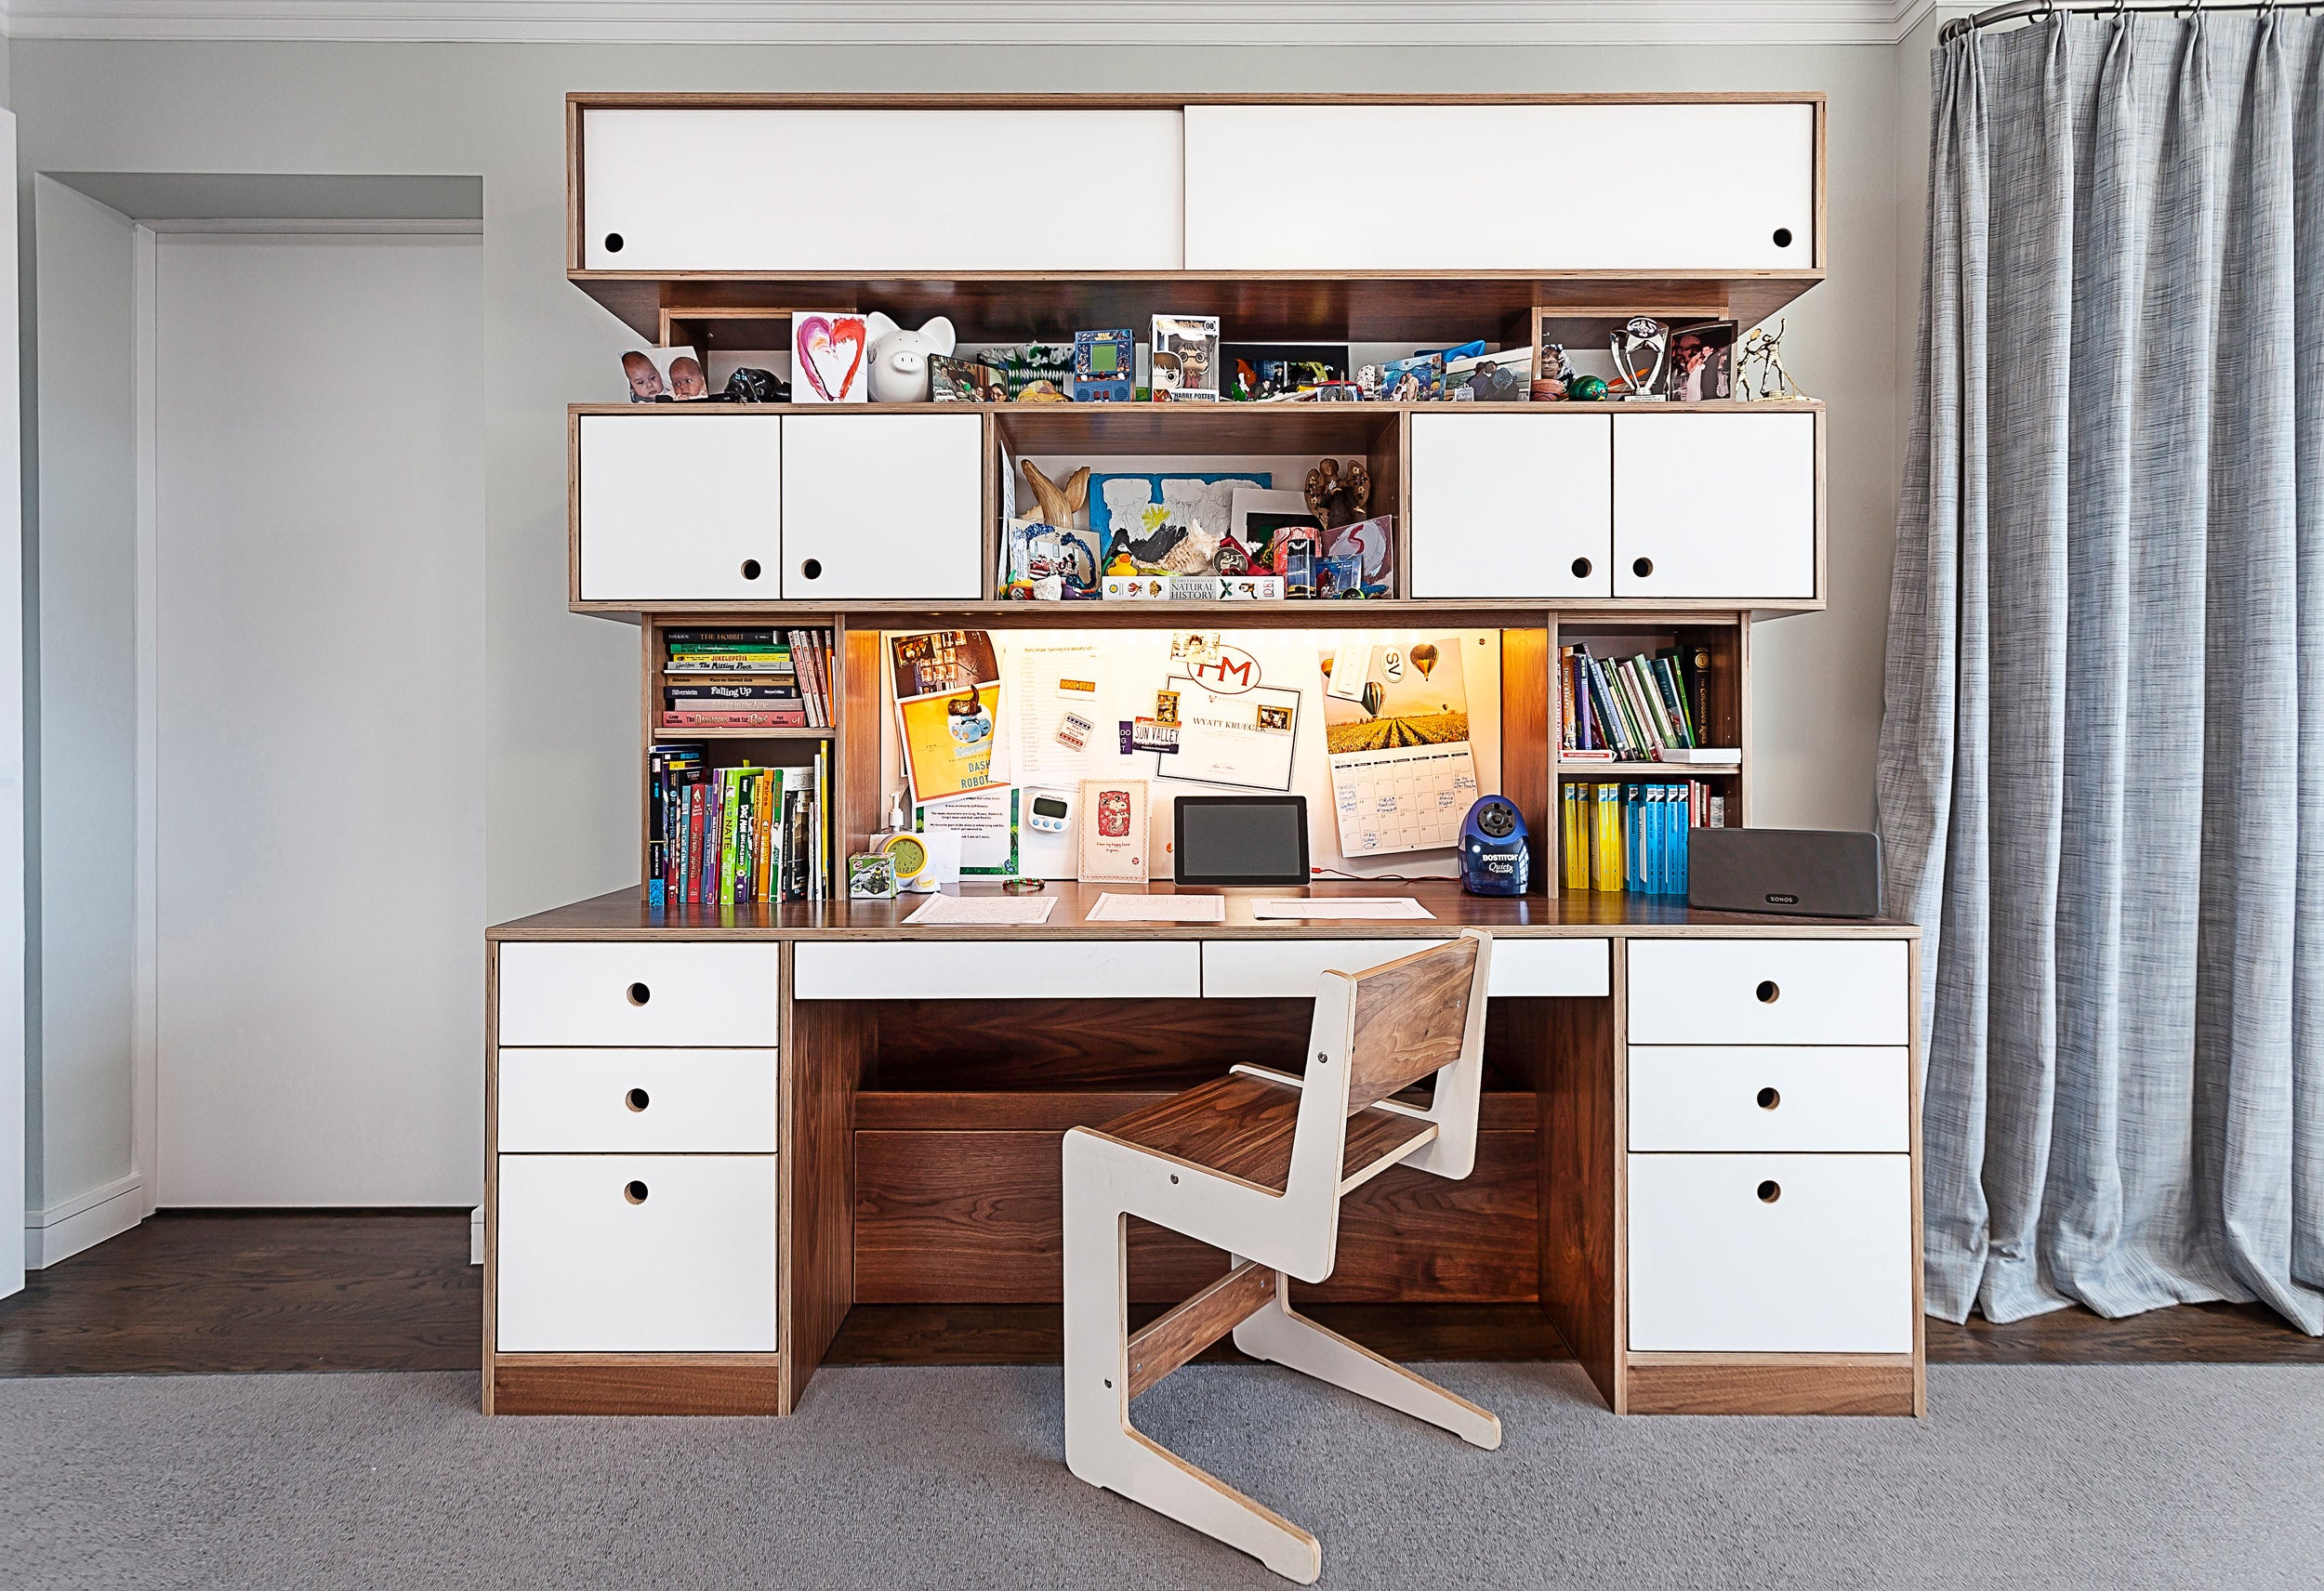 Create their dedicated “Home Office